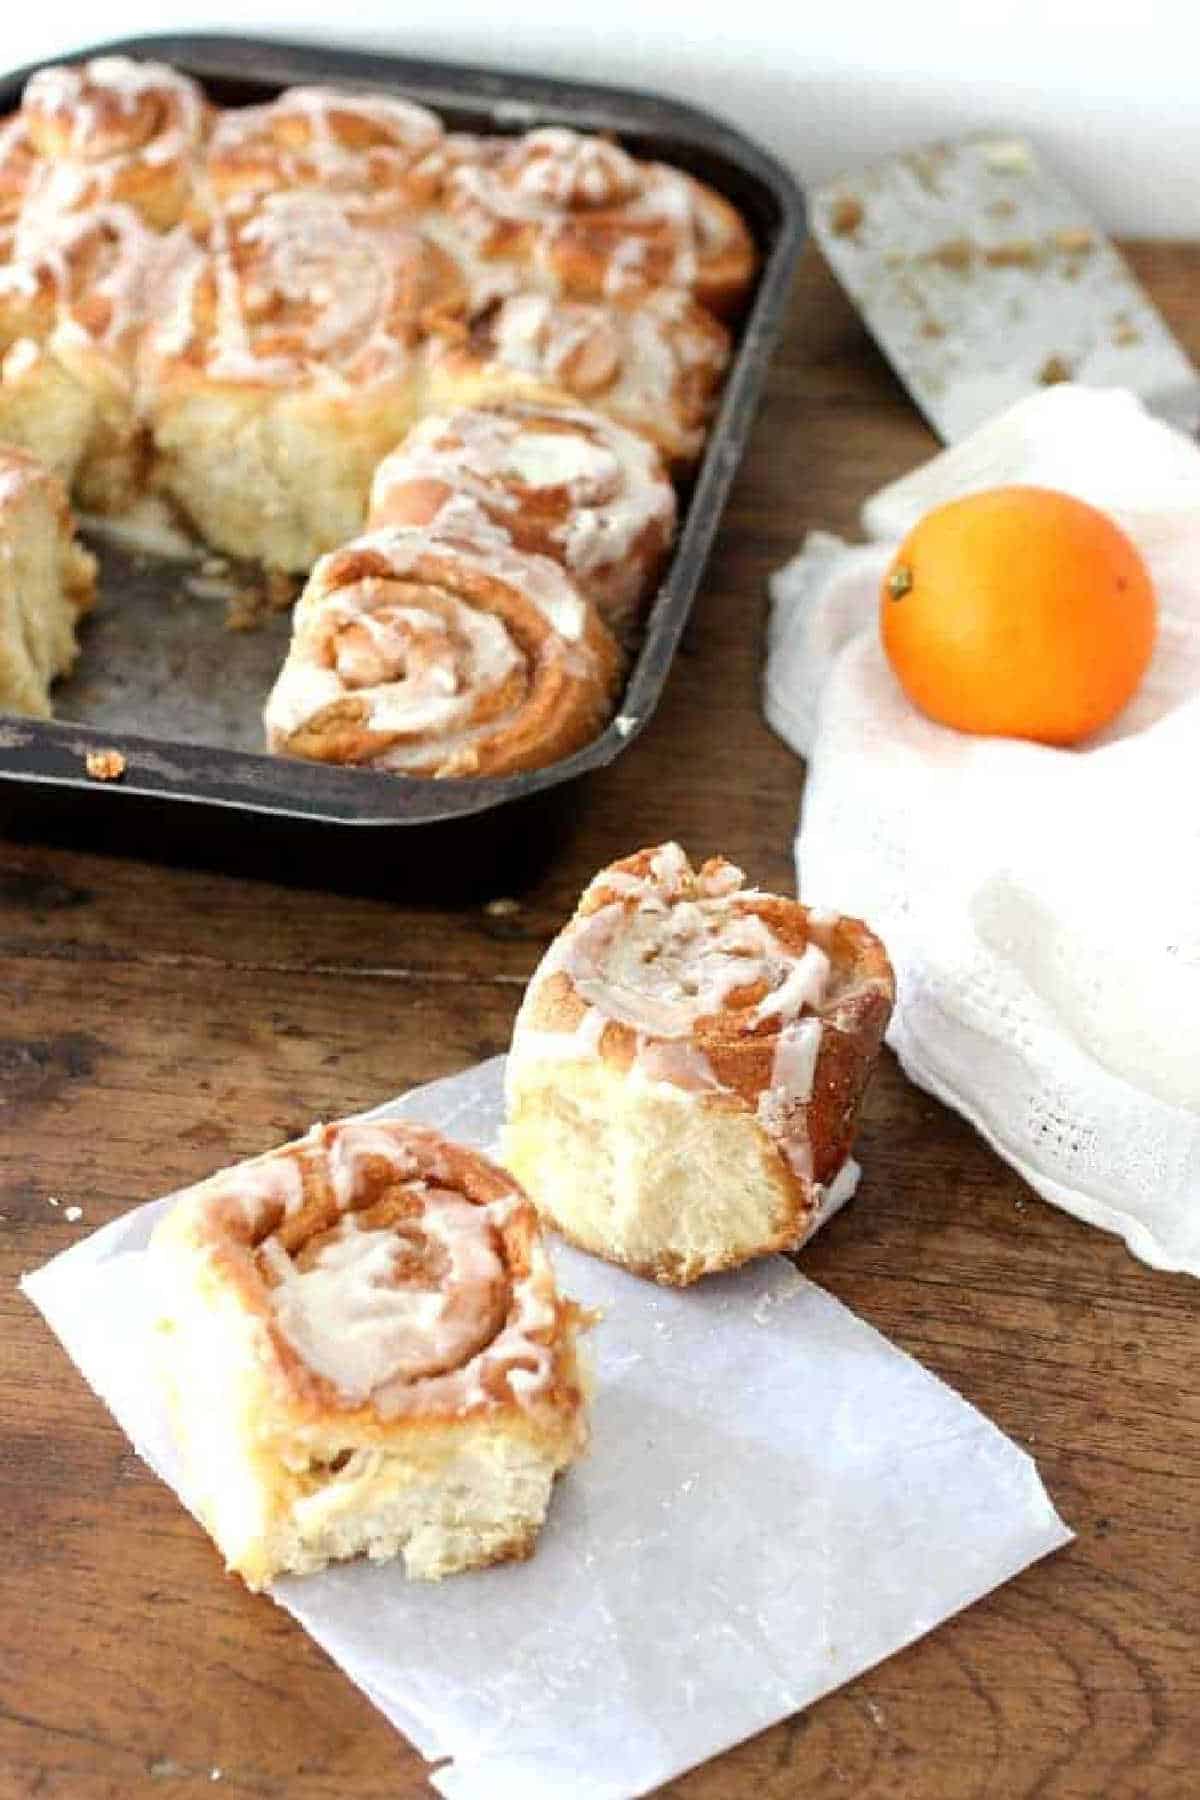 Wooden table with two cinnamon rolls, rest in metal pan, a white linen, an orange.